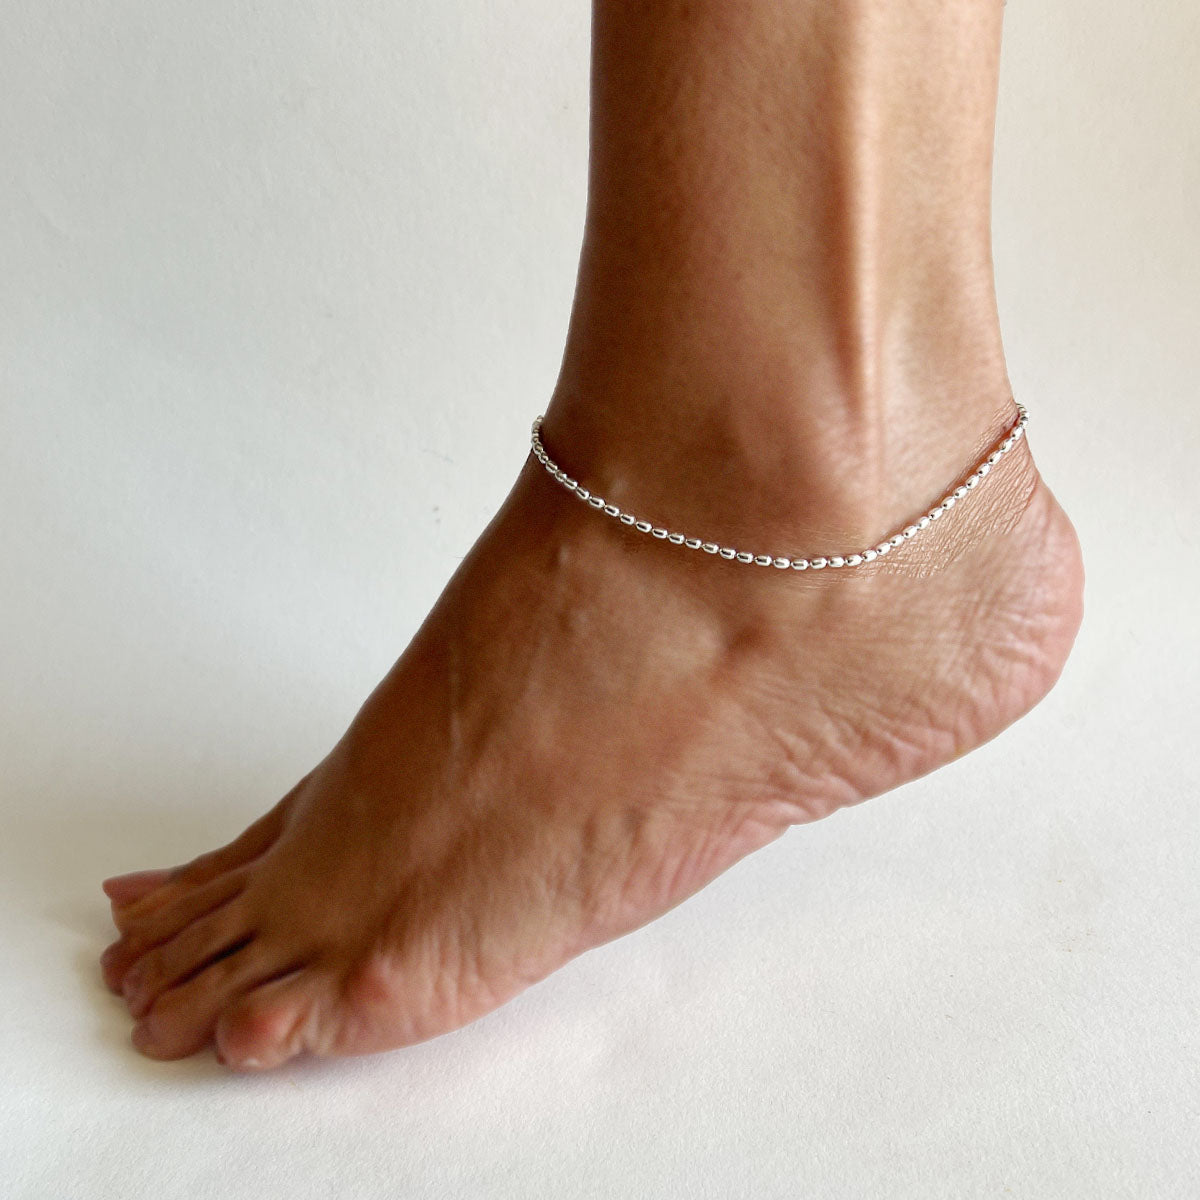 9.25 Silver Oval Chain Anklet (SINGLE)